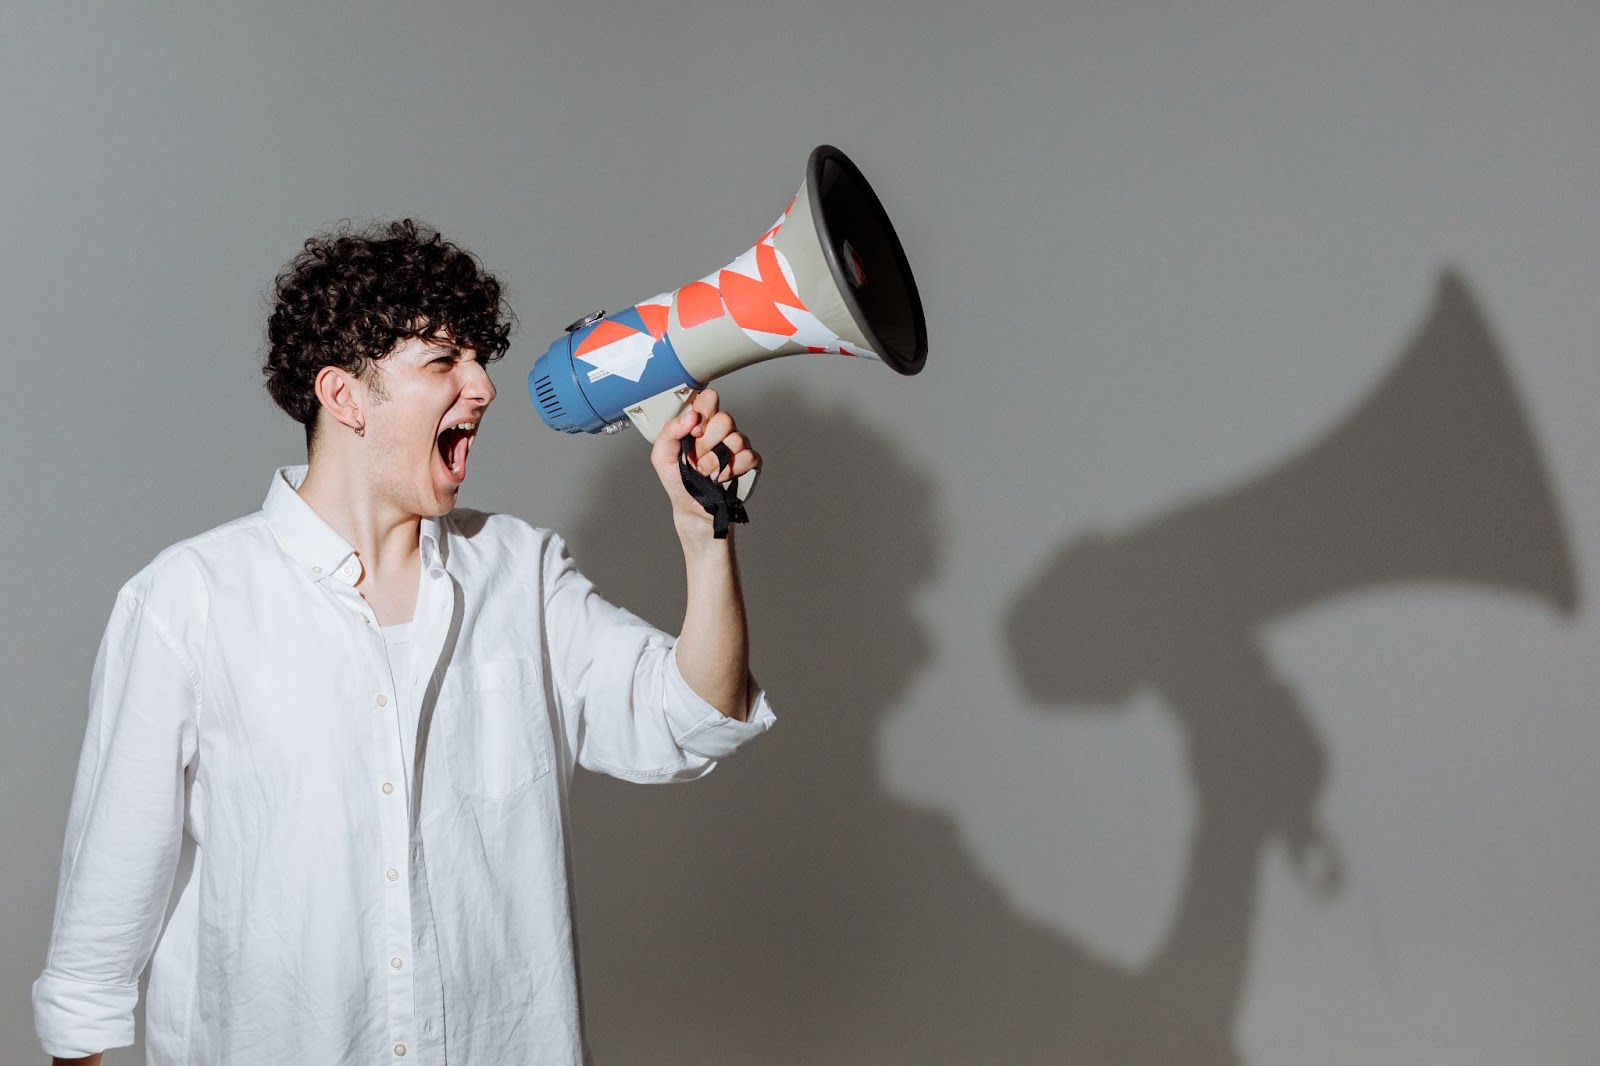 Someone stood in a white shirt, with short curly hair, shouting into a megaphone. Their shadow is prominent behind them. 